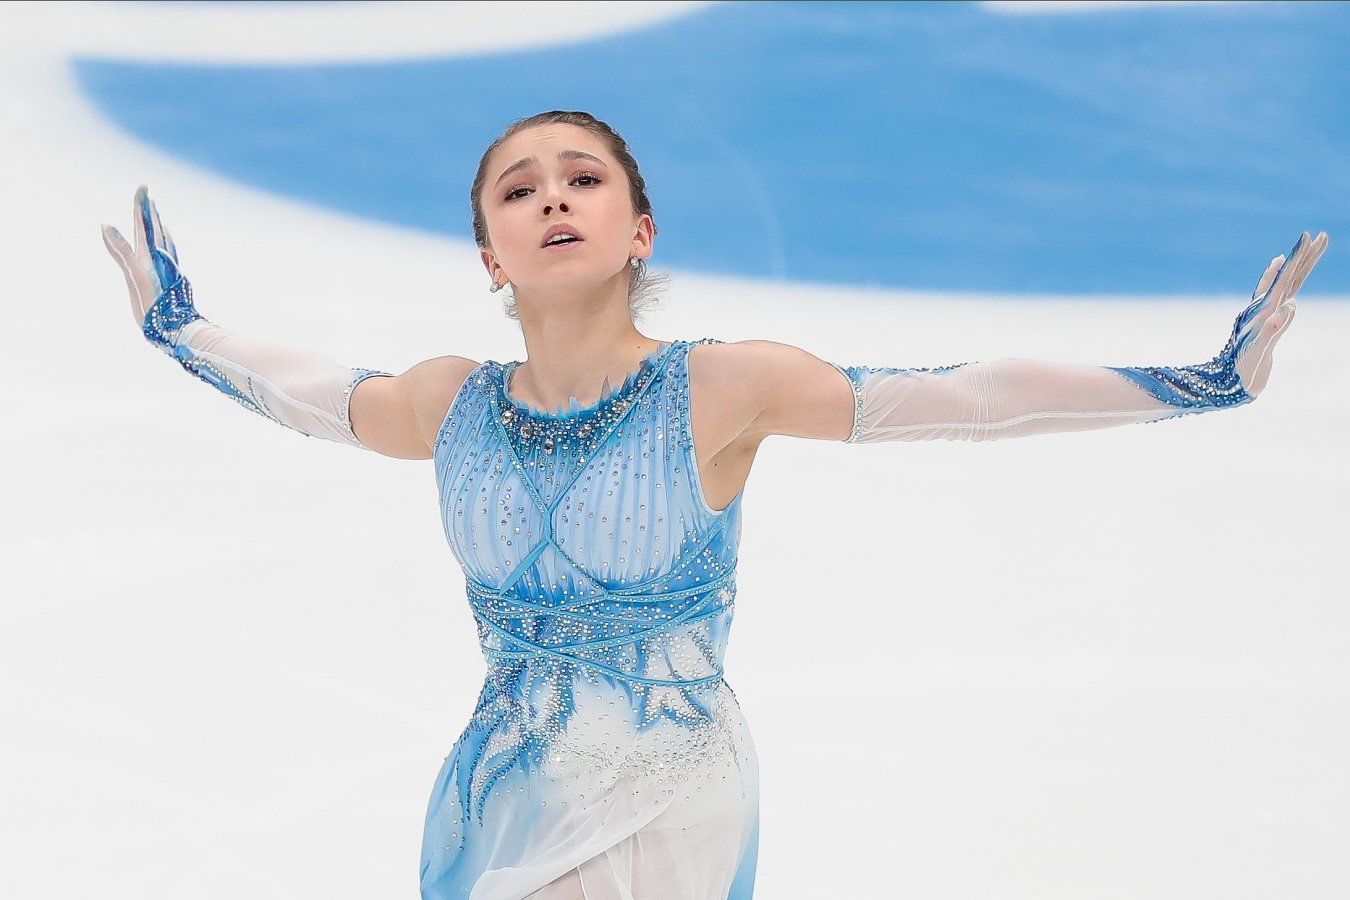 Beijing Olympics 2022: Another triumph for Russia in figure skating Prediction, Betting Tips & Odds│4 FEBRUARY, 2022